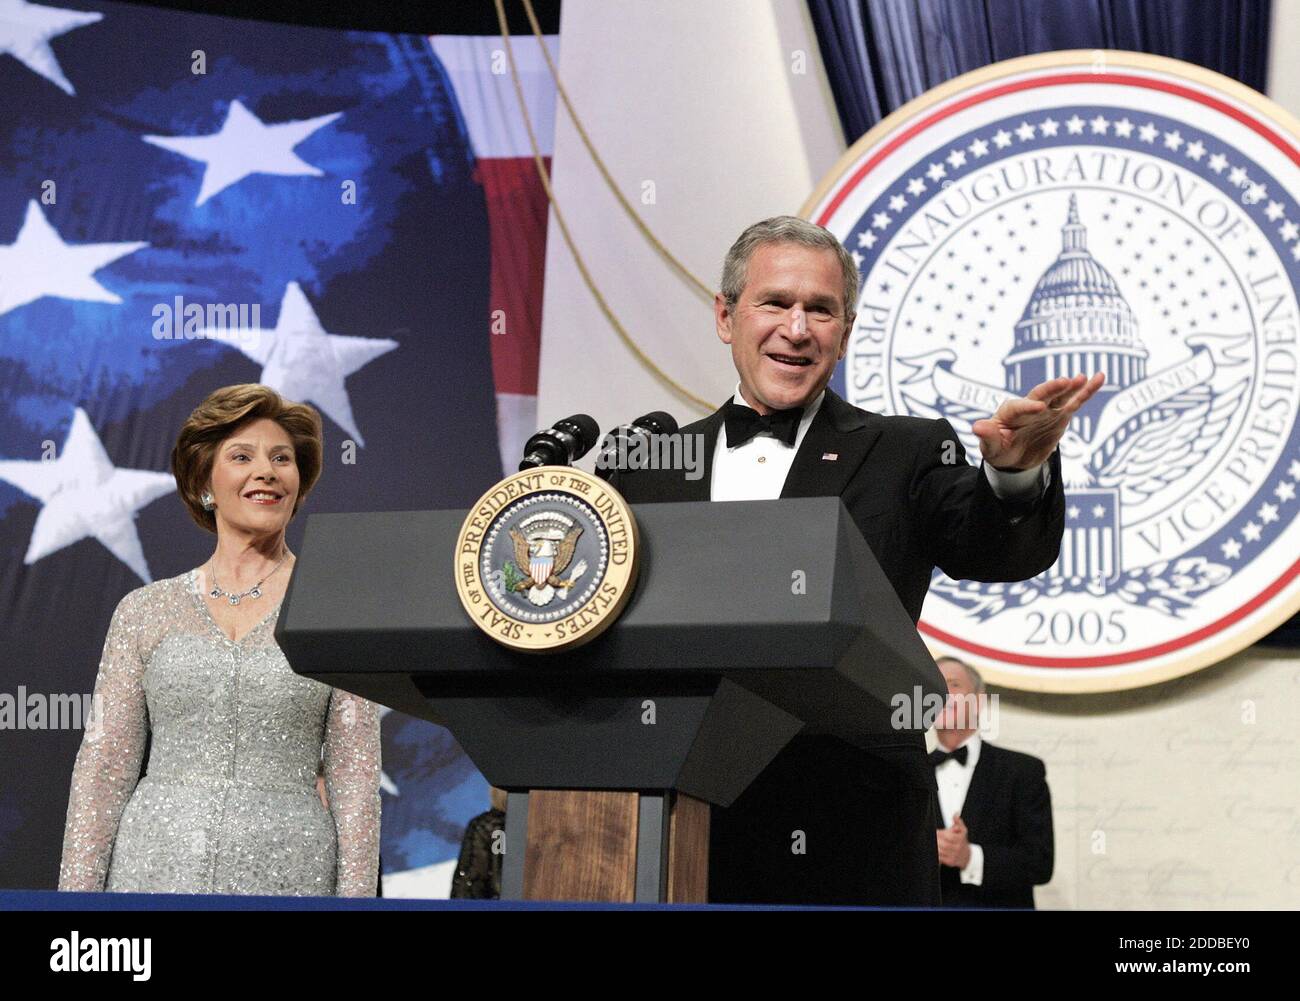 NO FILM, NO VIDEO, NO TV, NO DOCUMENTARY - President George W. Bush and first lady Laura Bush speak at the Texas and Wyoming Inaugural Ball in Washington, DC, USA, on January 20, 2005. Photo by Chuck Kennedy/US News Story Slugged/KRT/ABACA. Stock Photo